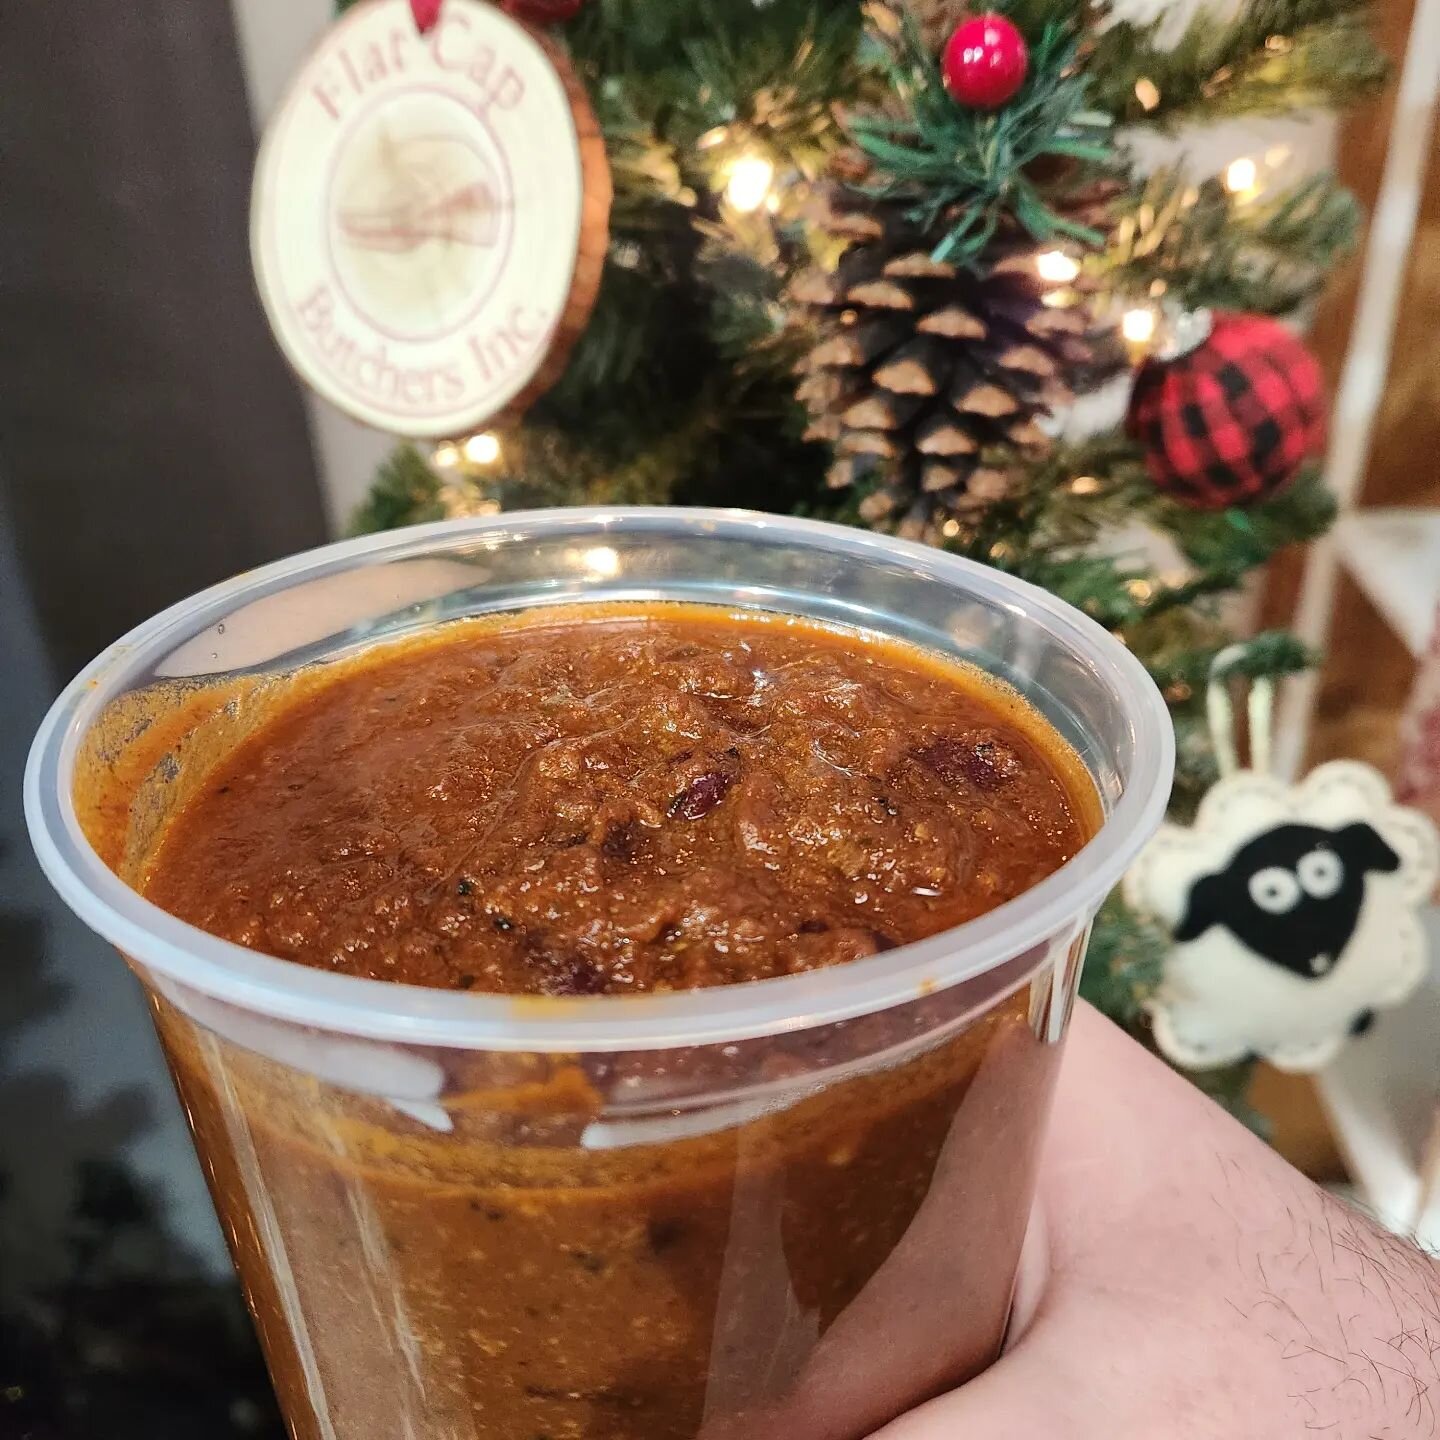 Tester batch of our homemade chili hitting the counter this week. Very limited supply but worth a try. We use extra Lean ground beef, and brisket, along with beer, 3 hot/mild varieties of peppers, tomatoes, cilantro, and a special blend of spices...a